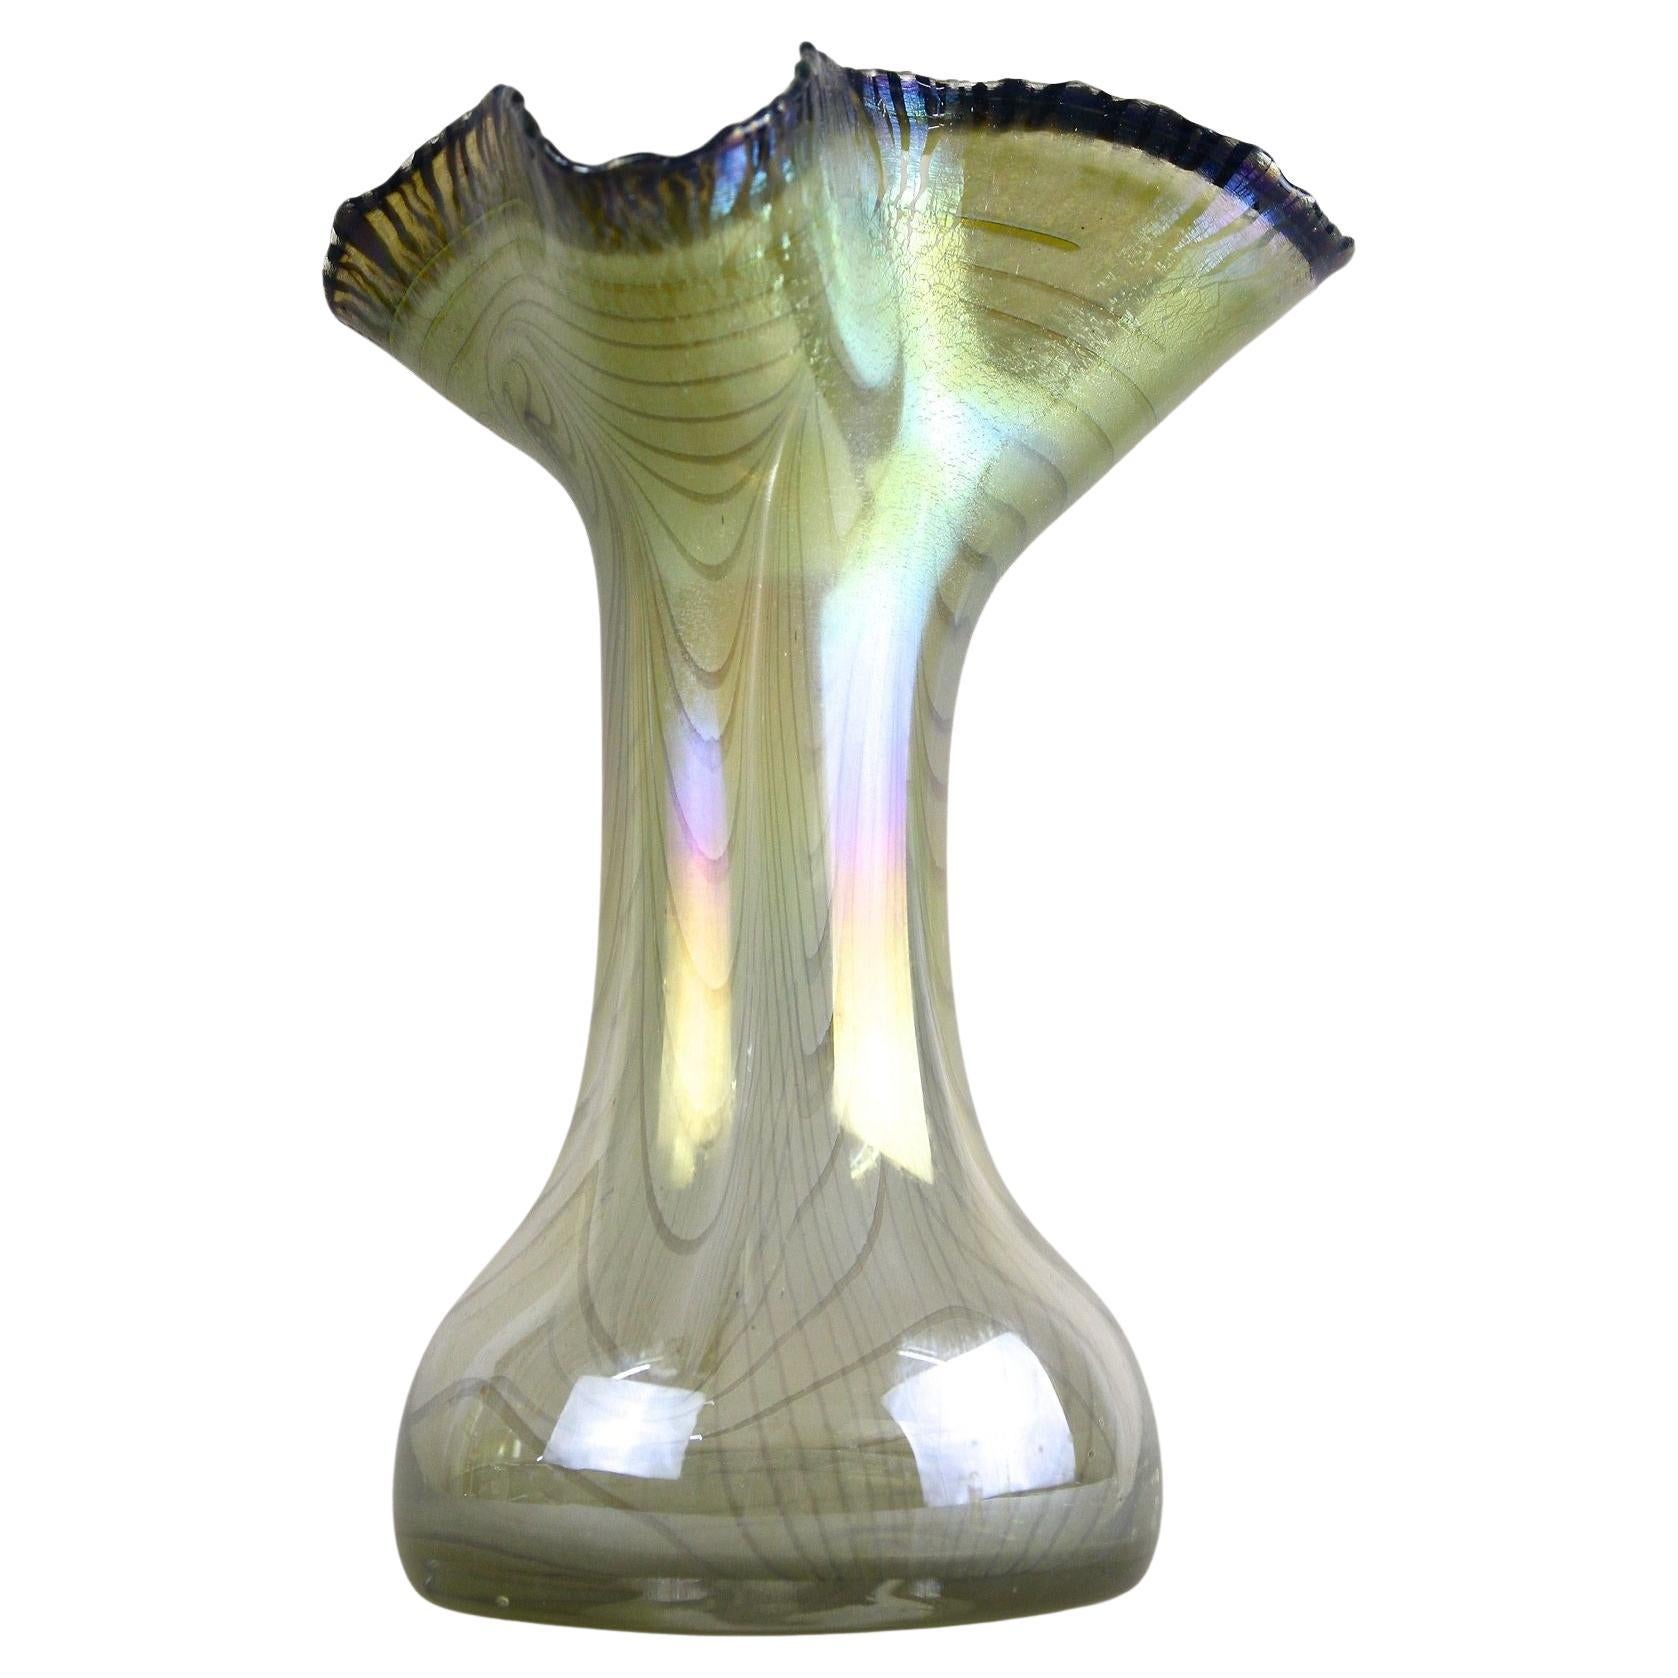 20th Century Iridescent Glass Vase by E. Eisch - Signed, Germany 1982 For Sale